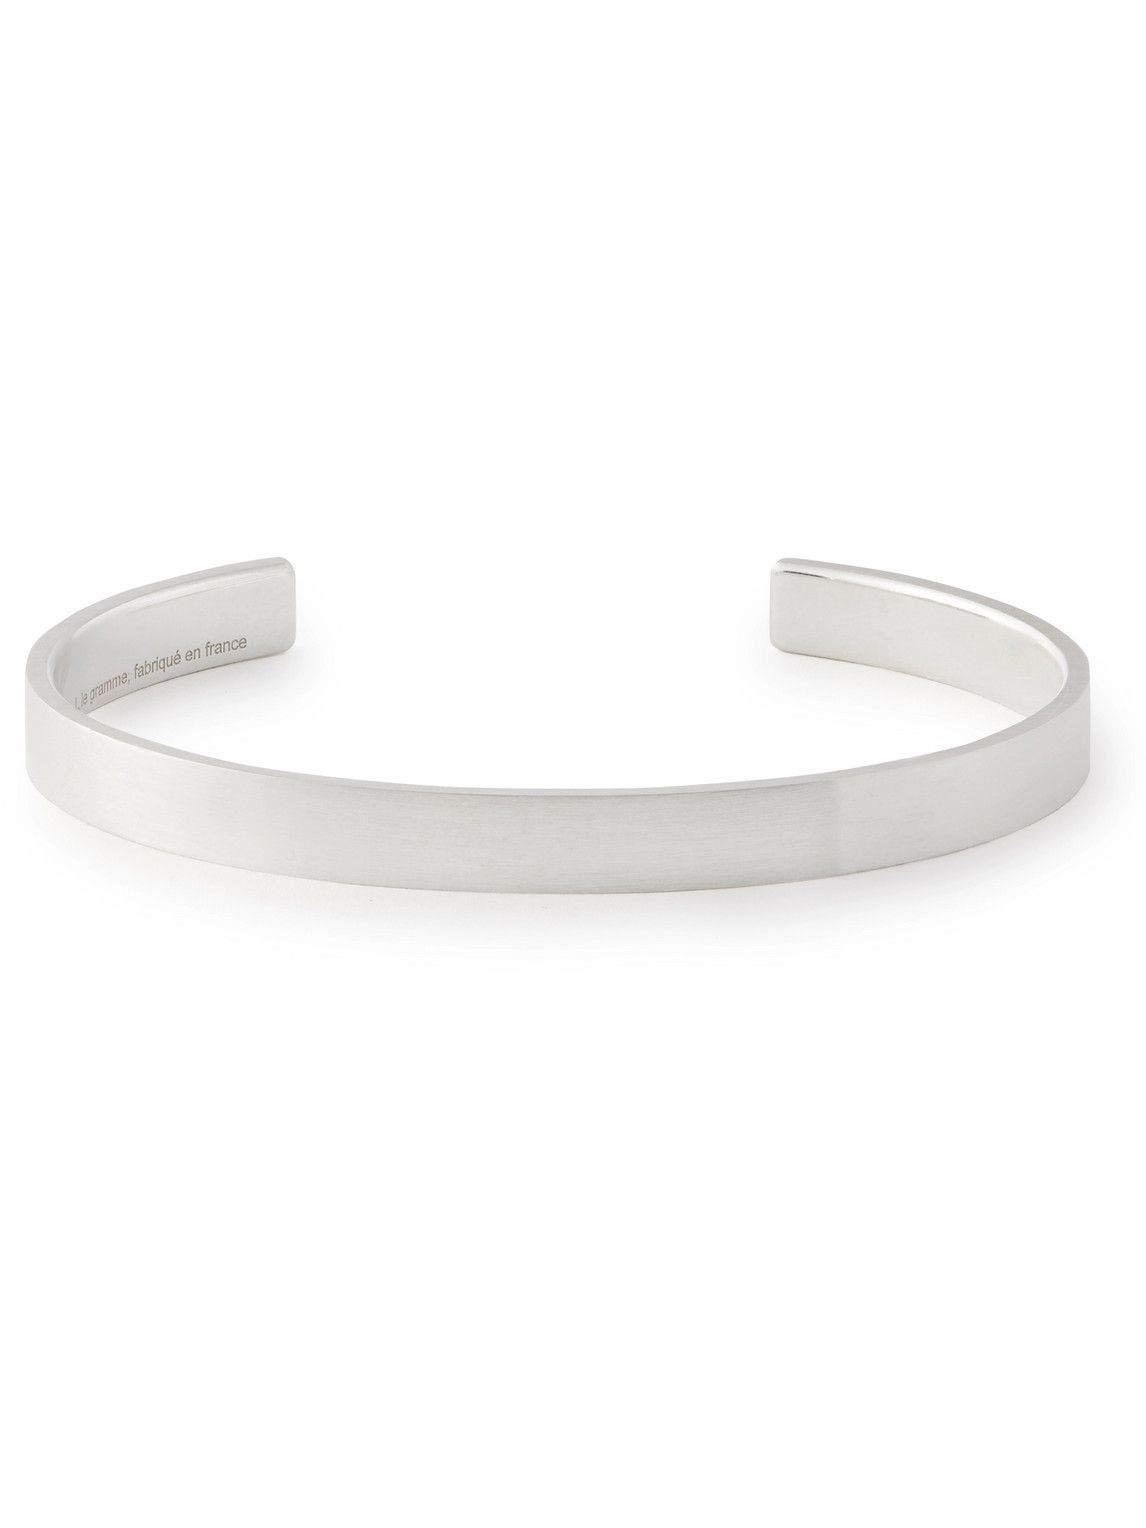 Le Gramme - 21g Brushed Sterling Silver Cuff - Silver Le Gramme